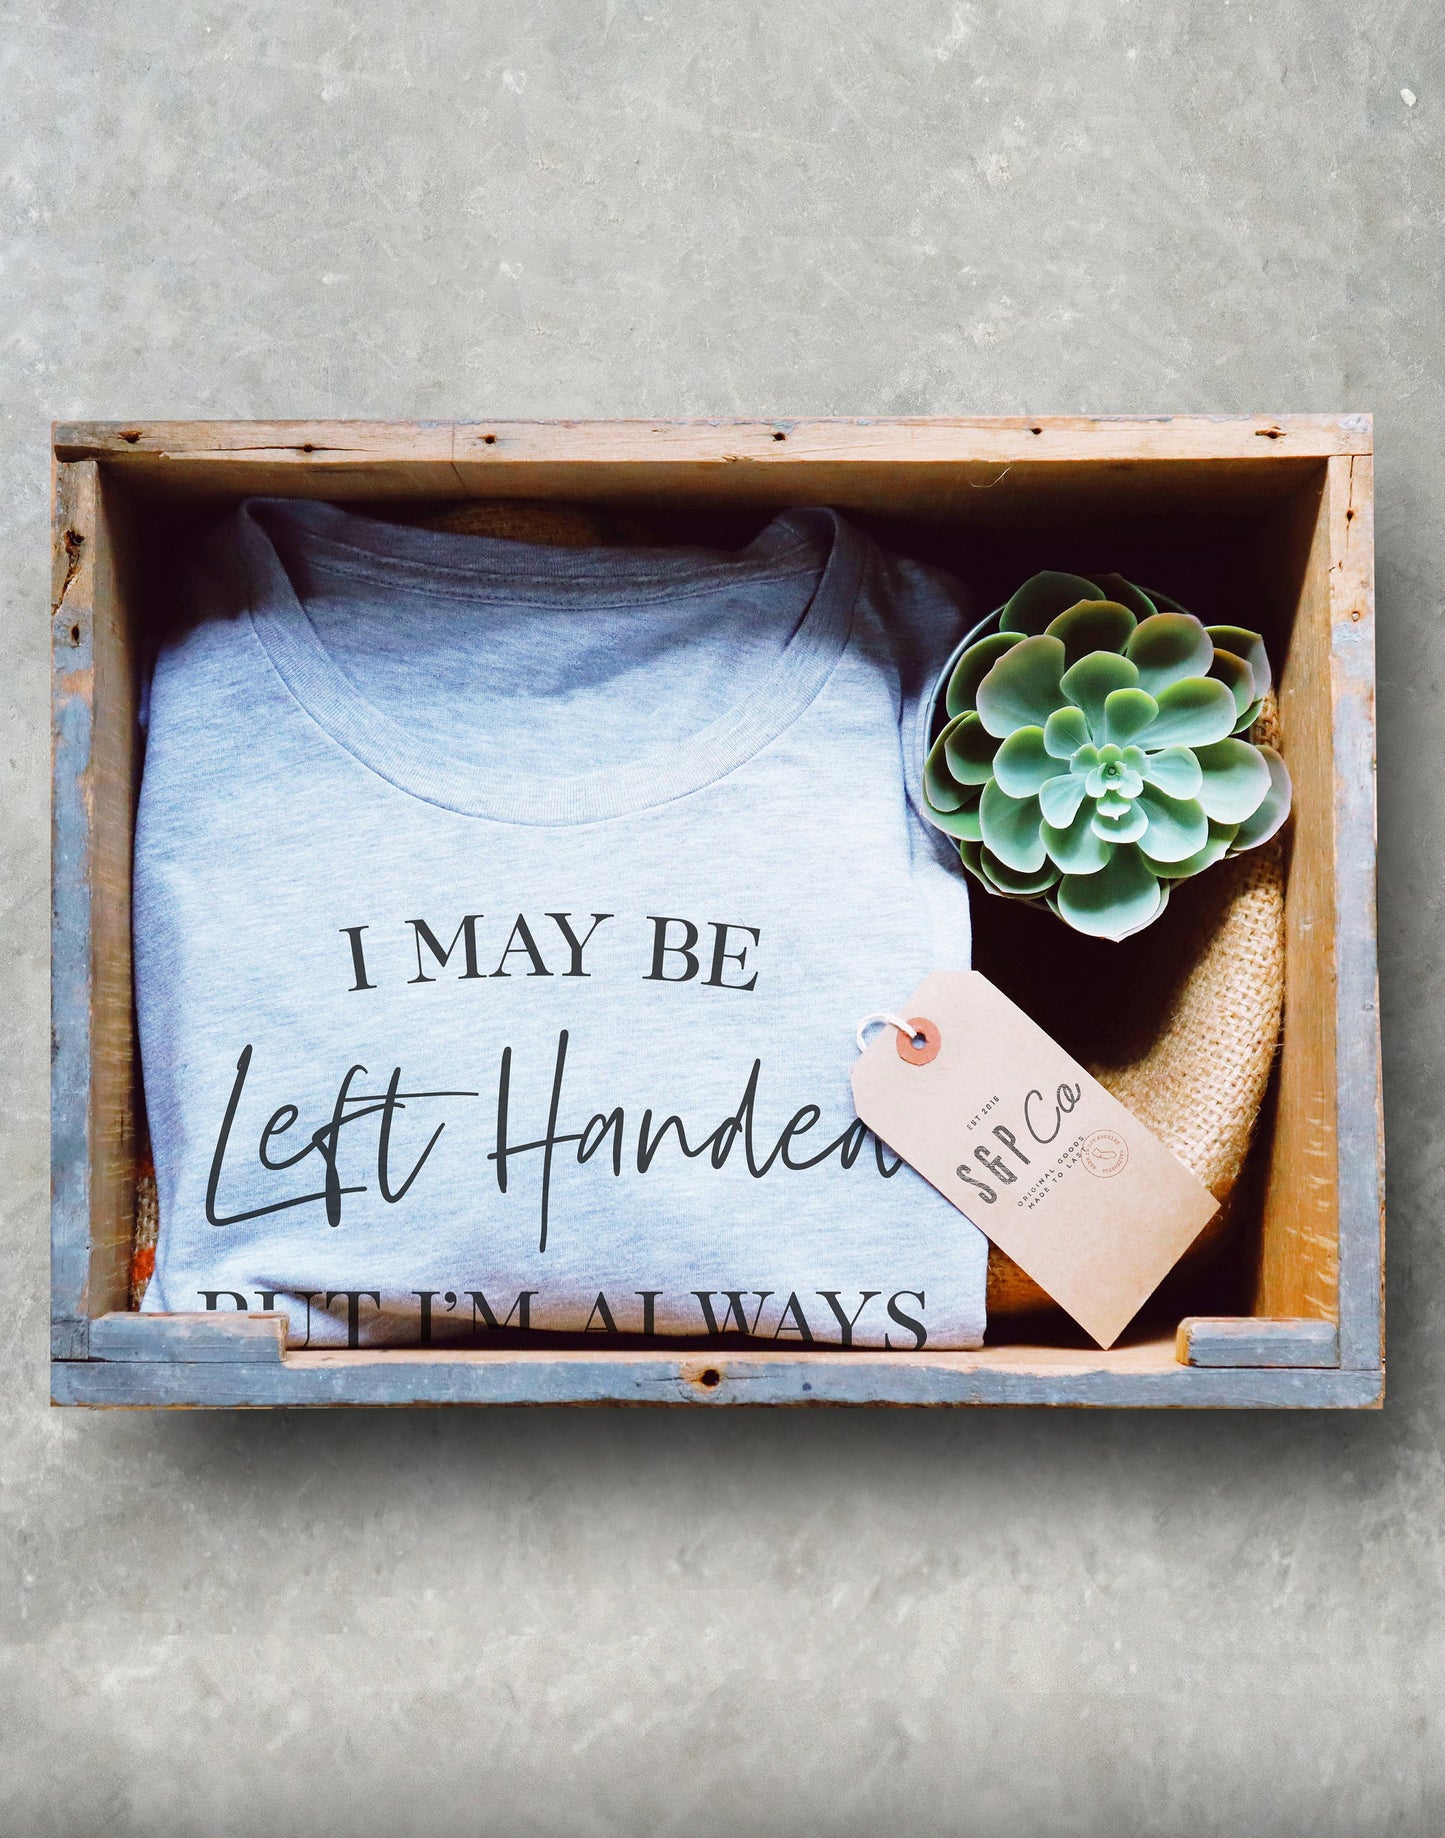 Left Handed Gift - Lefty Unisex Shirt, I May Be Left Handed But I’m Always Right, Funny Sayings Shirt, Know it all Shirt, Left Handers Day